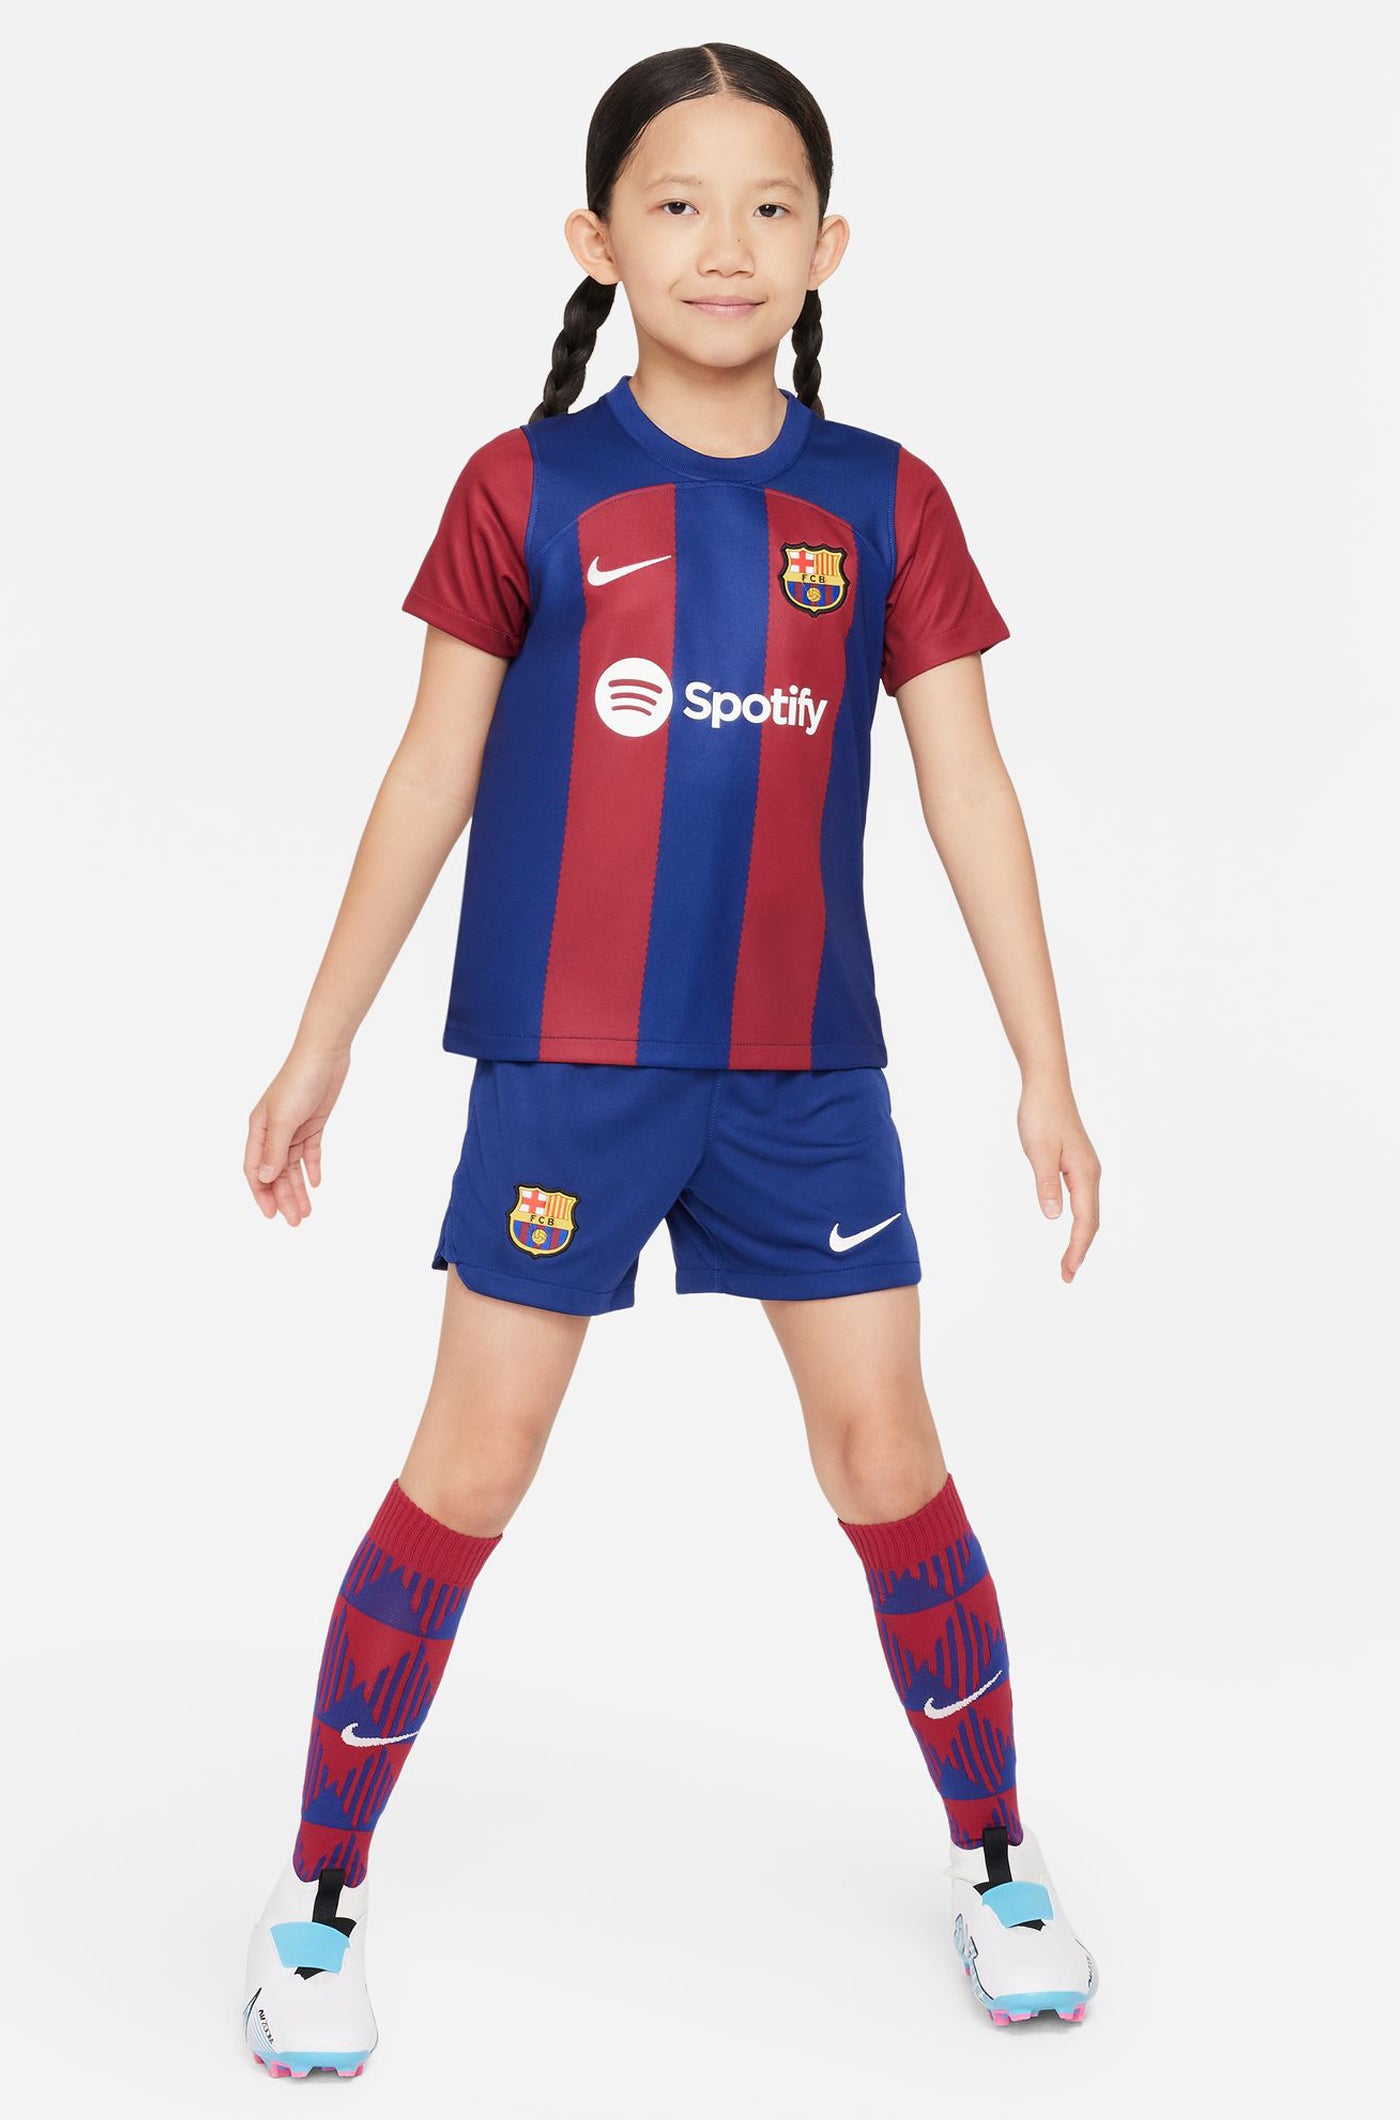 FC Barcelona home Kit 23/24 – Younger Kids  - PINA